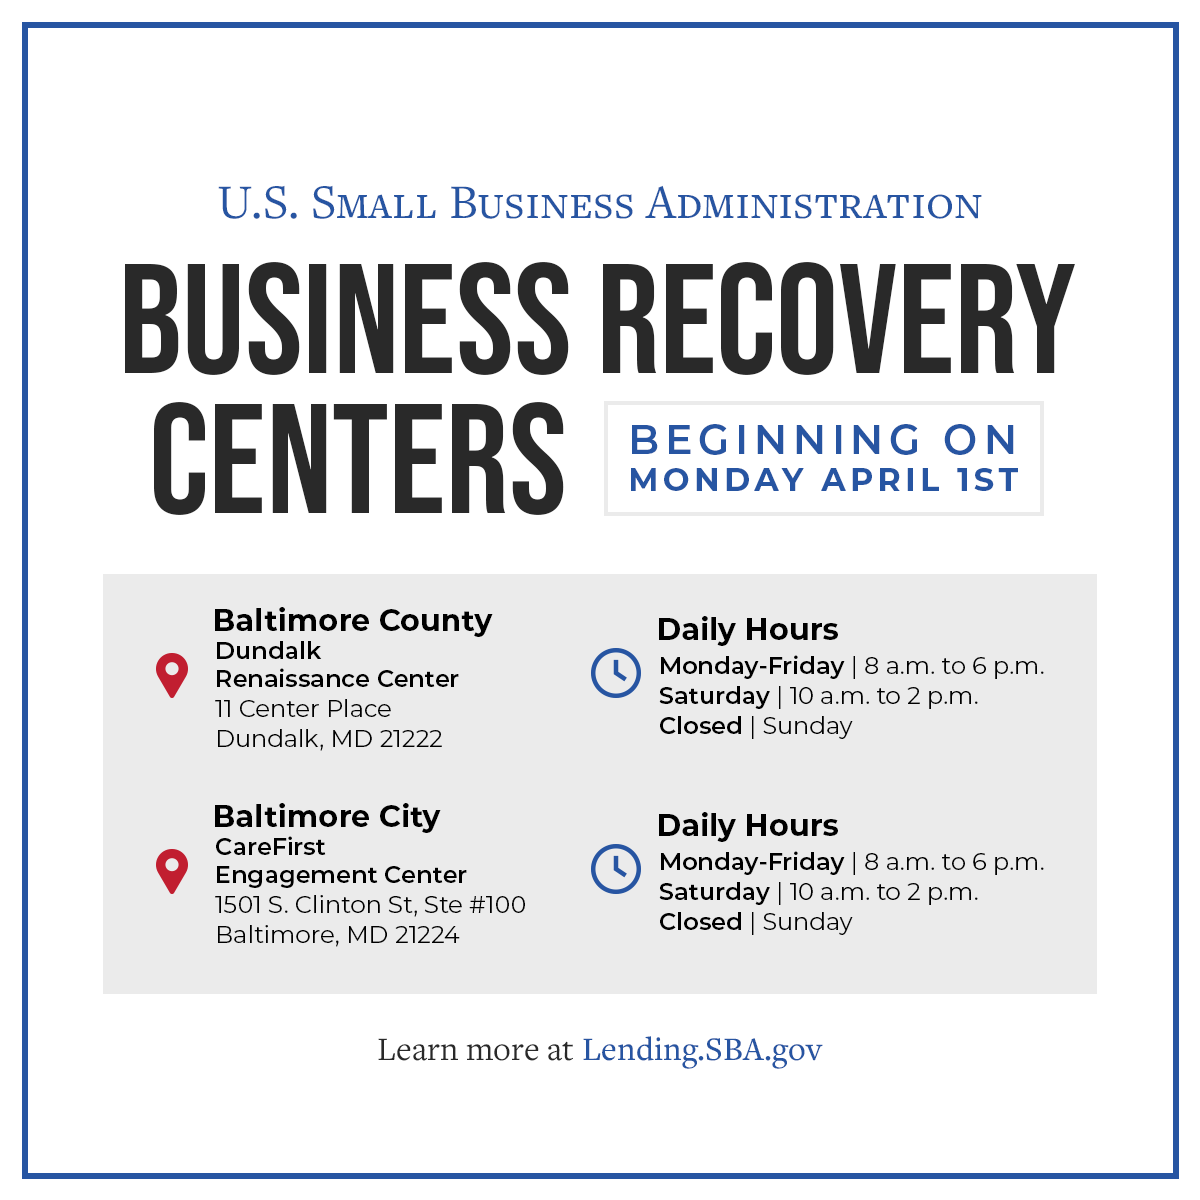 Today, @SBAgov will begin to operate the following Business Recovery Centers to assist business owners in completing disaster loan applications, accept documents for existing applications, and provide status updates on loan applications. lending.sba.gov